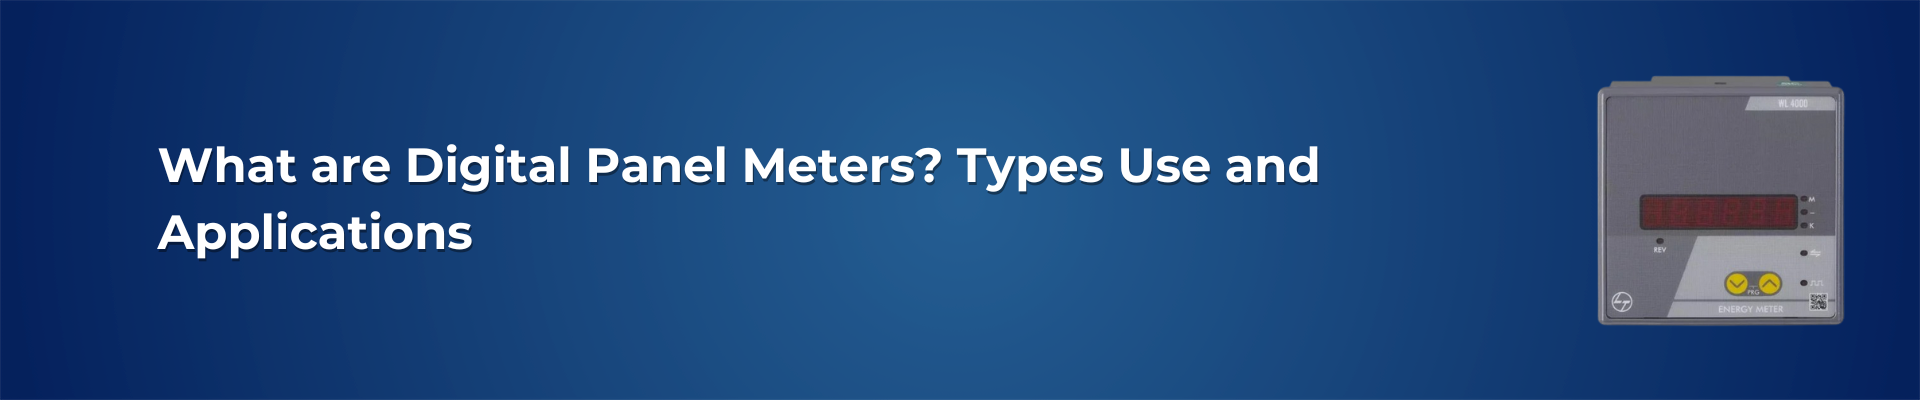 What are Digital Panel Meters? Types Use and Application